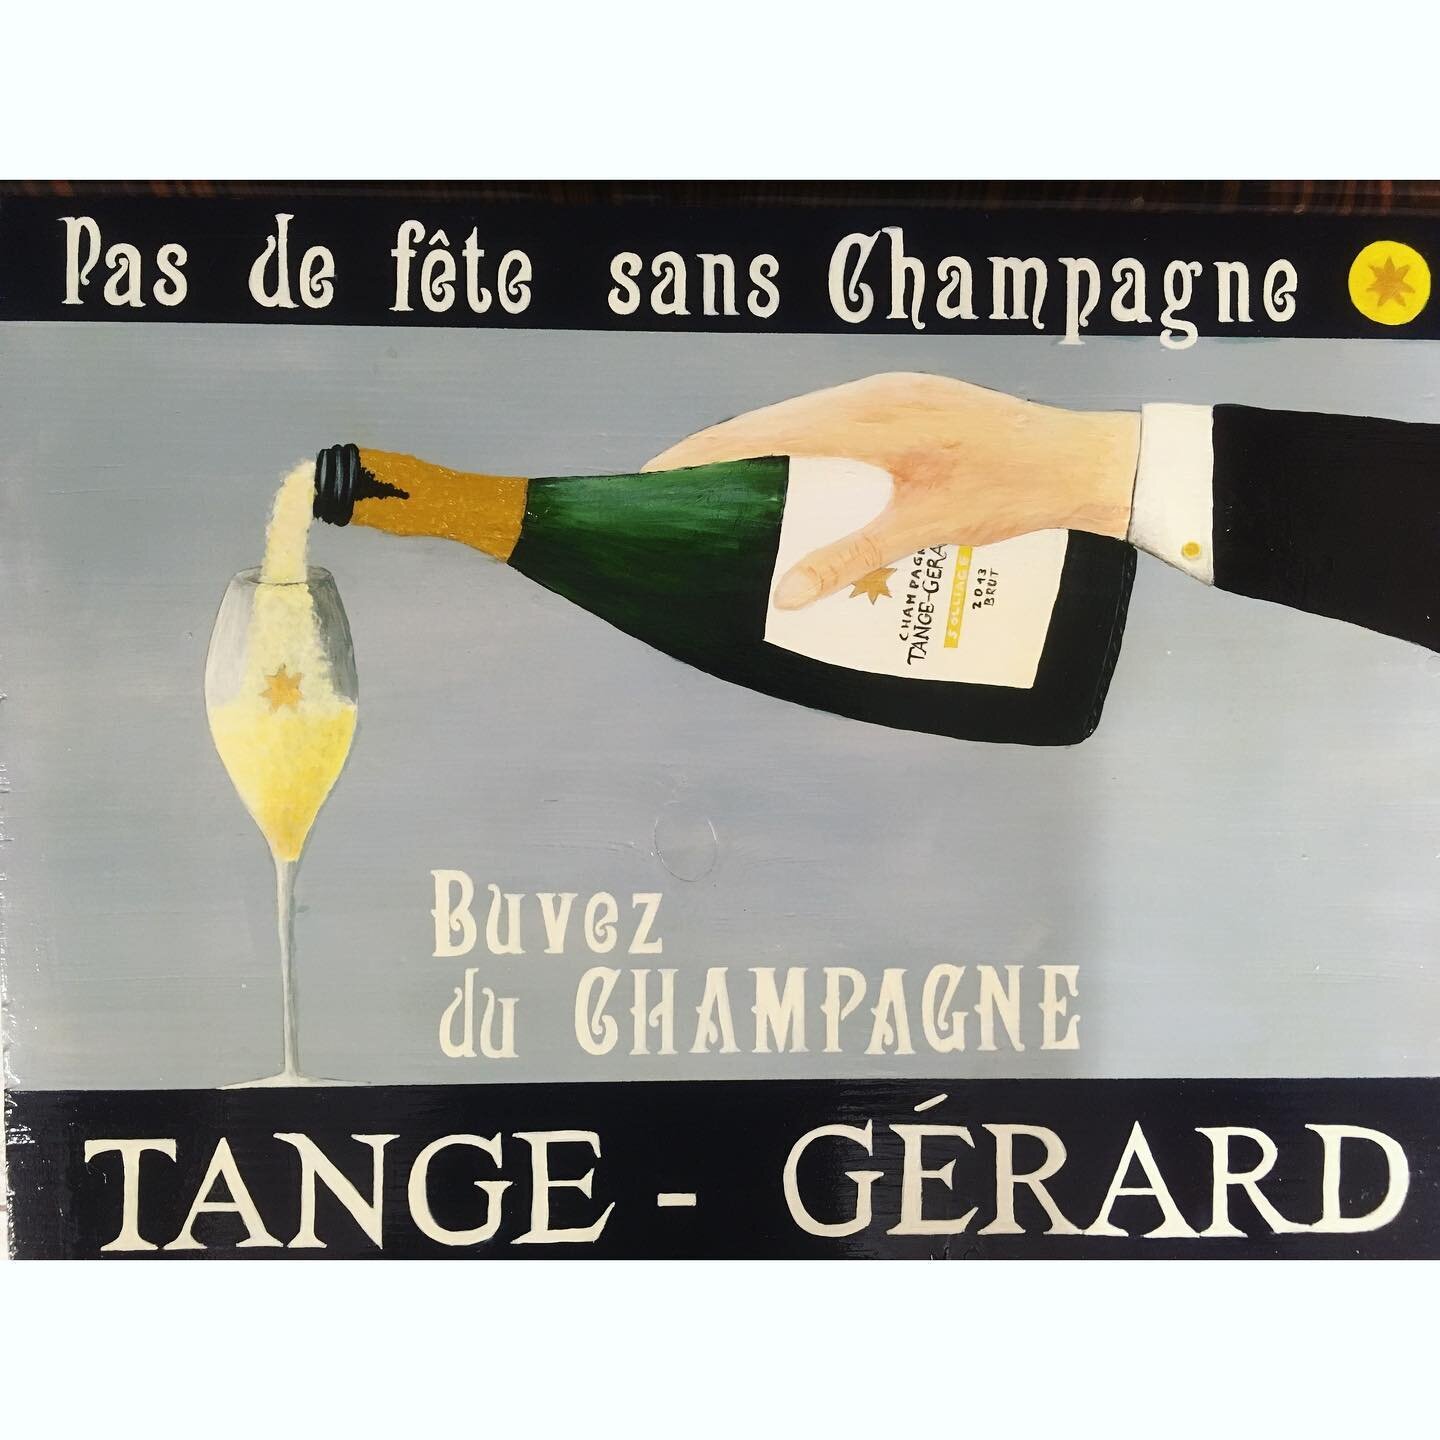 Apero is short for aperitif. So many words and names have their abbreviations in French, this one is easy to remember. It&rsquo;s a favourite in the Tange-Gerard household and elevated to an art in the entire Champagne region.
*
We Danes have our mid